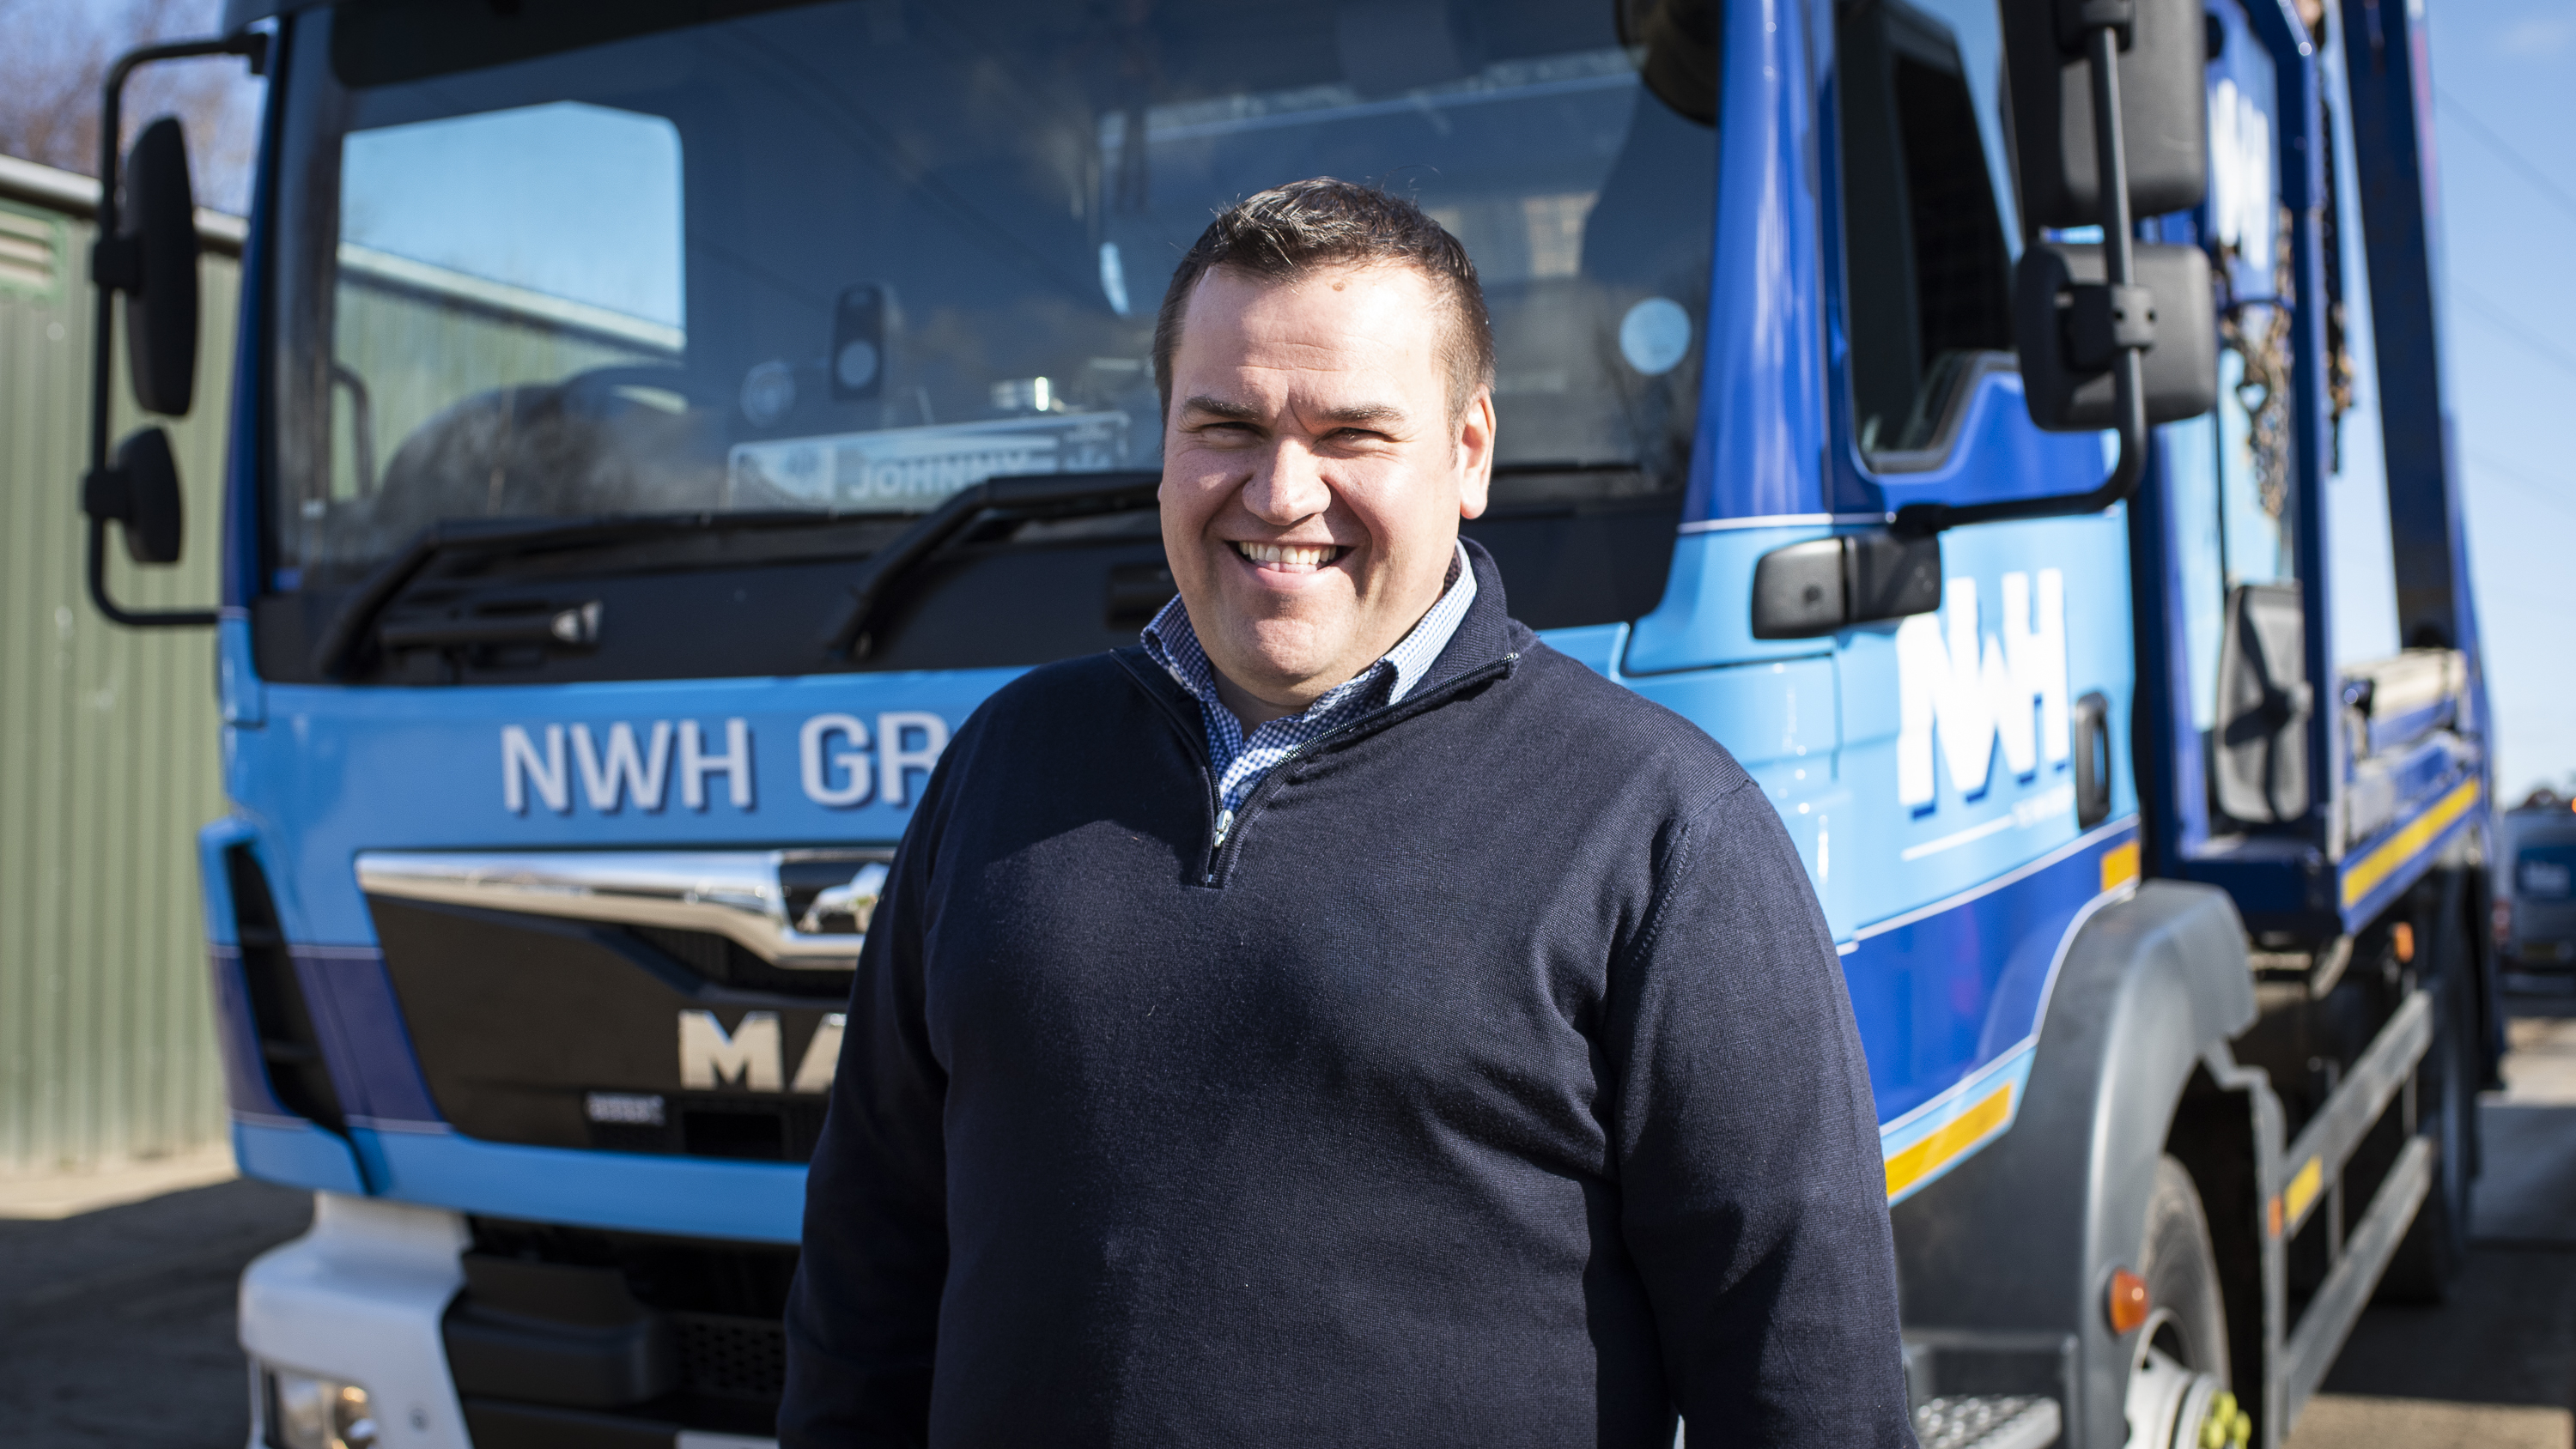 NWH acquires recycling business in Tyne and Wear